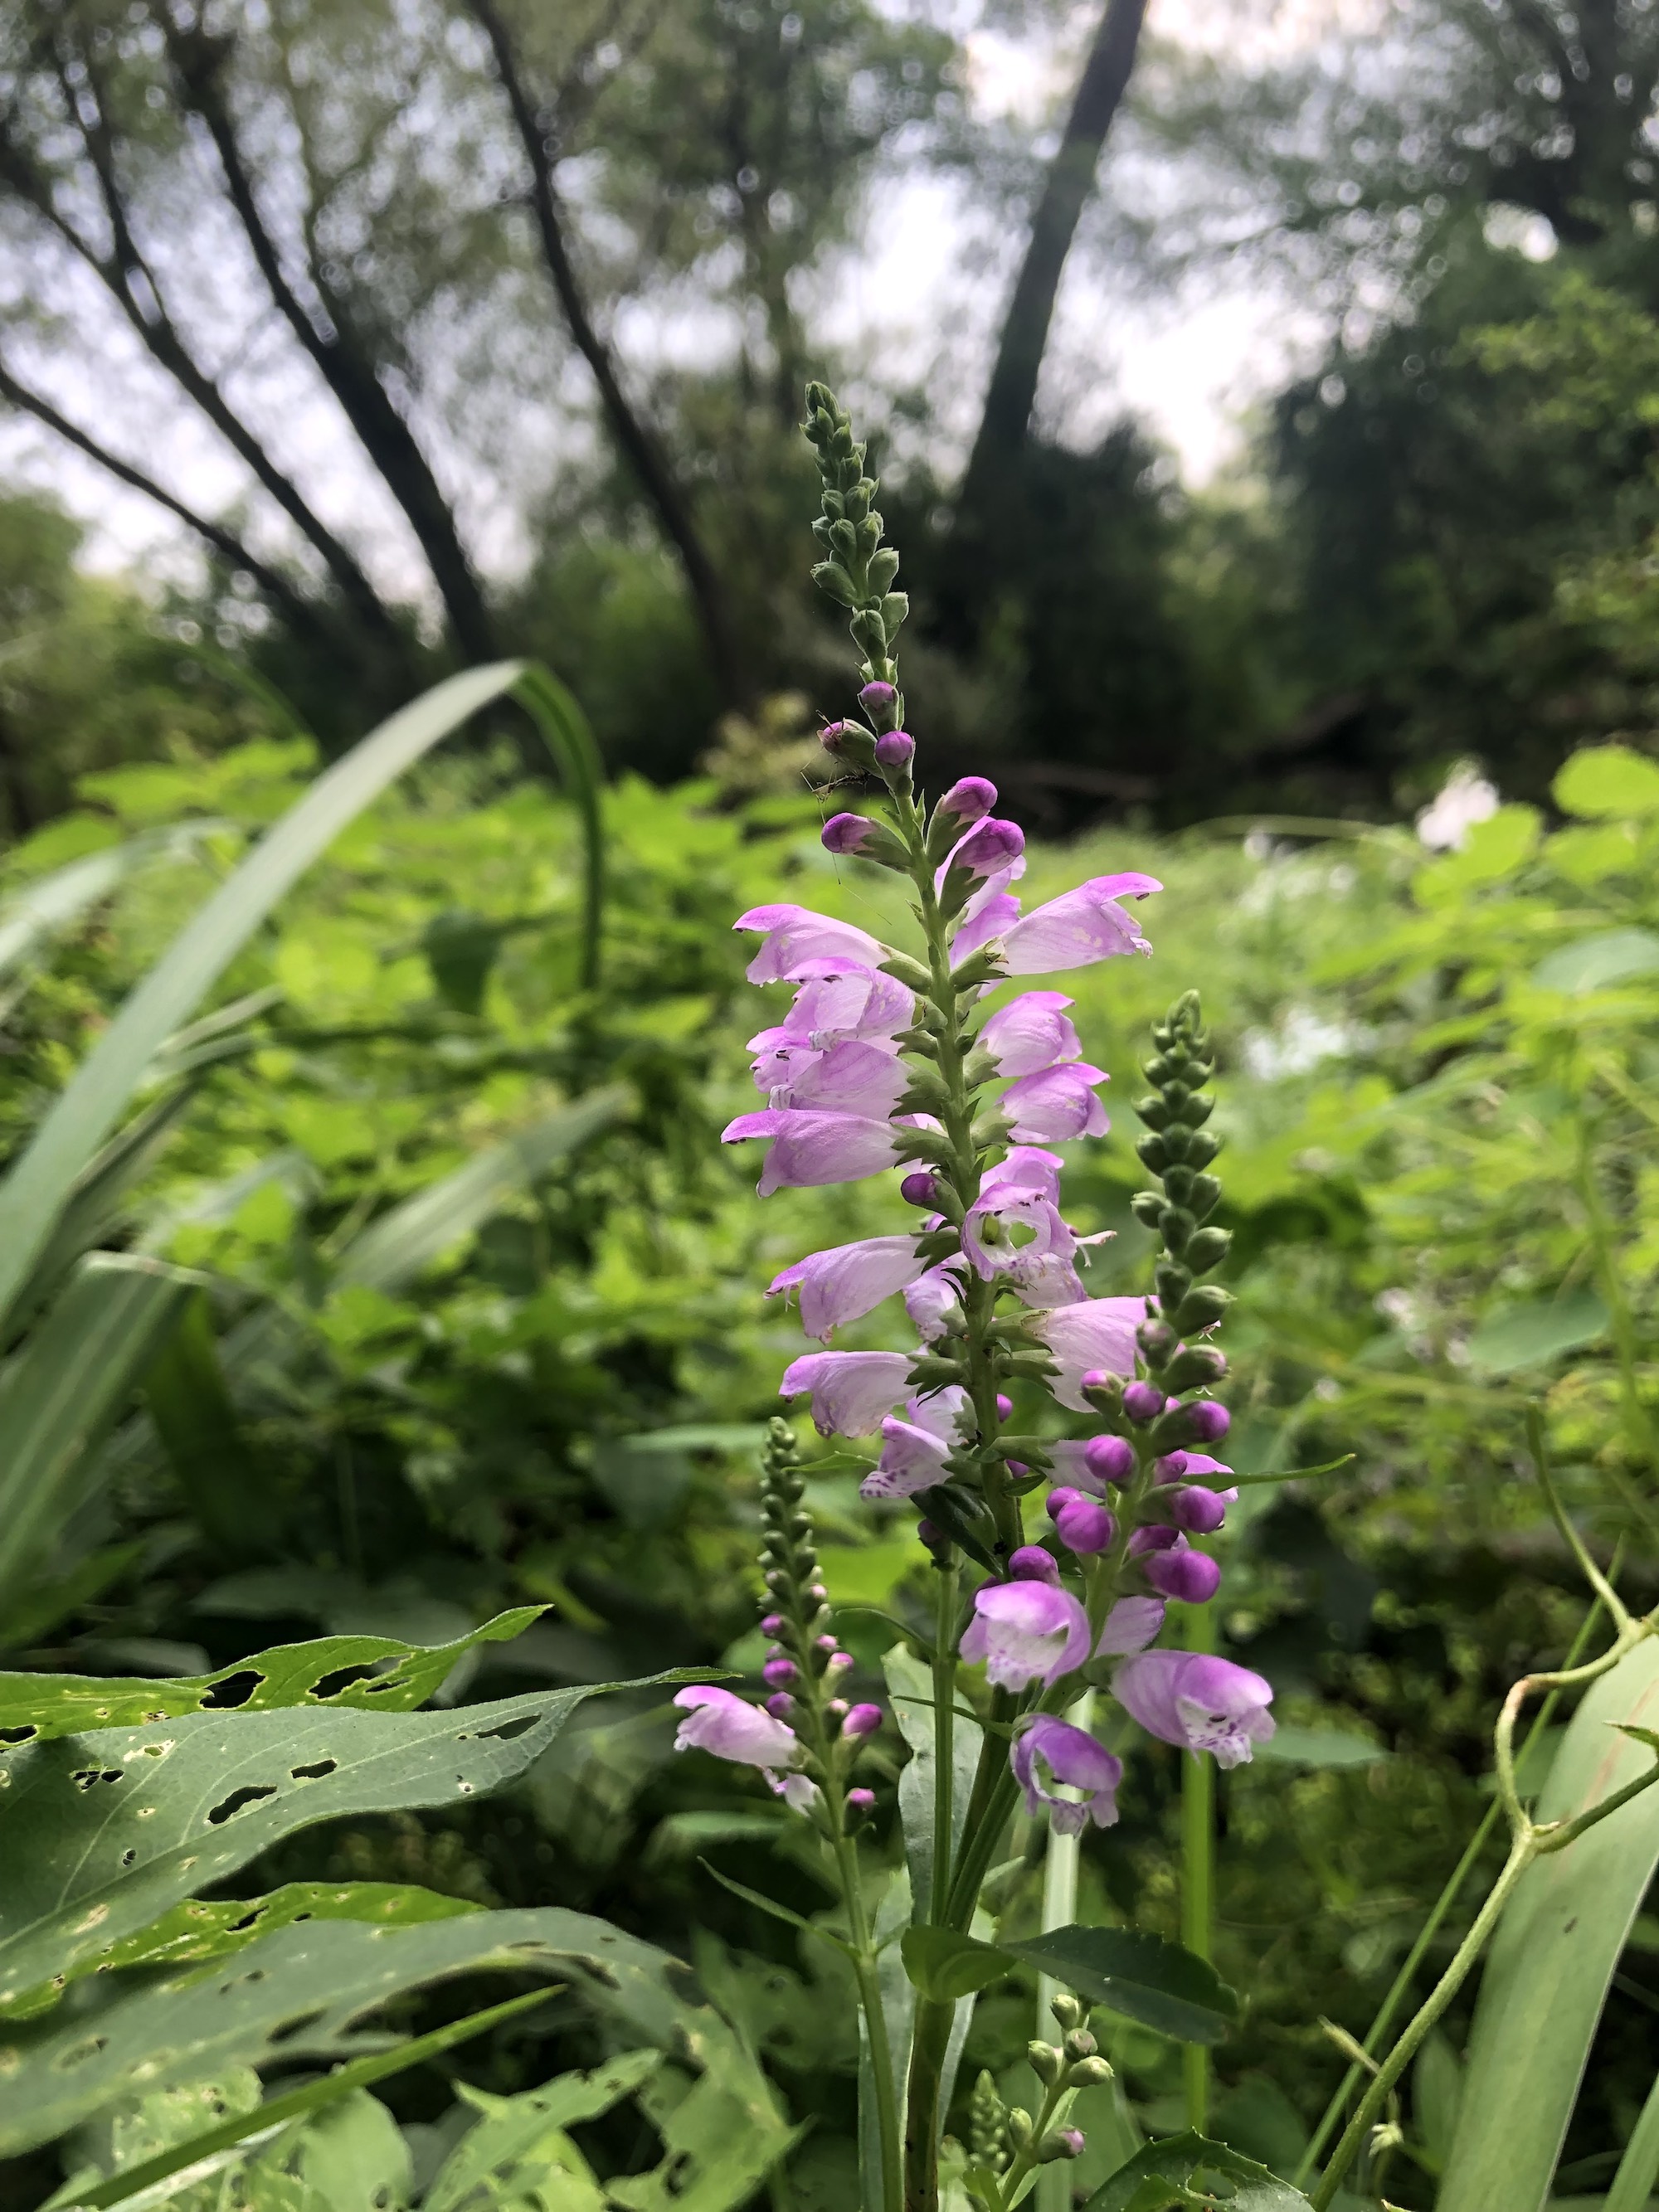 Obedient Plant at source of Dancing Sands spring in Madison, Wisconsin on August 3, 2021.